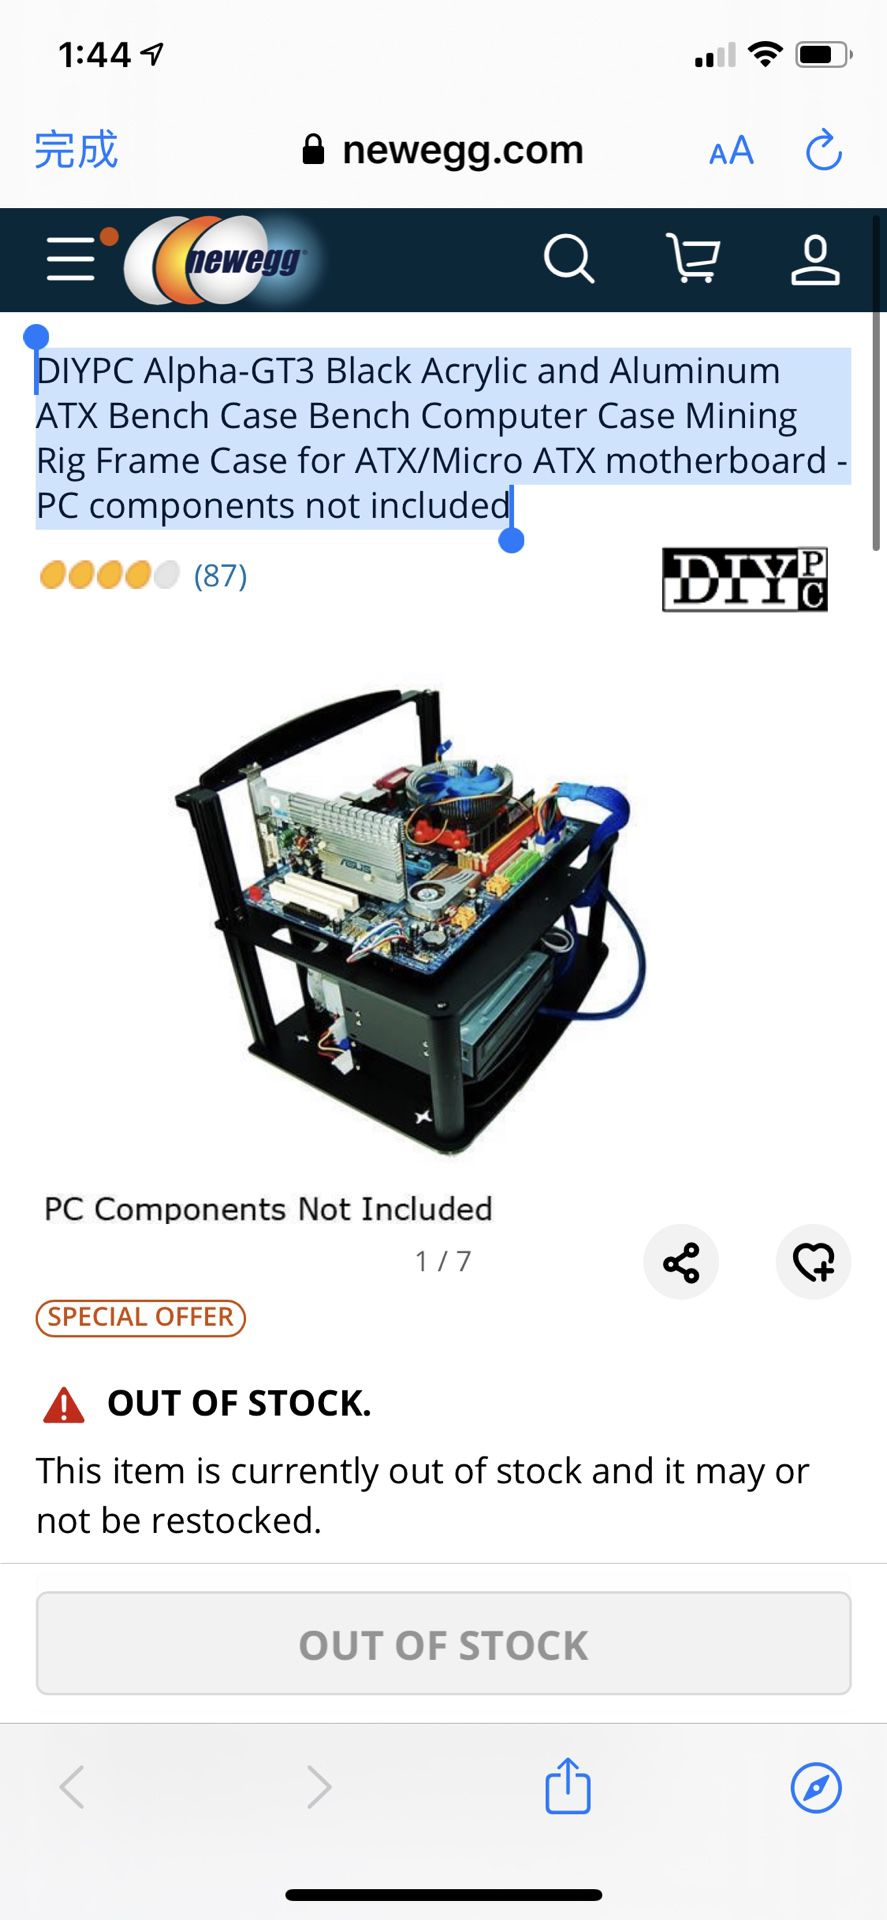 DIYPC Alpha-GT3 Black Acrylic and Aluminum ATX Bench Case Bench Computer Case Mining Rig Frame Case for ATX/Micro ATX motherboard - PC components not